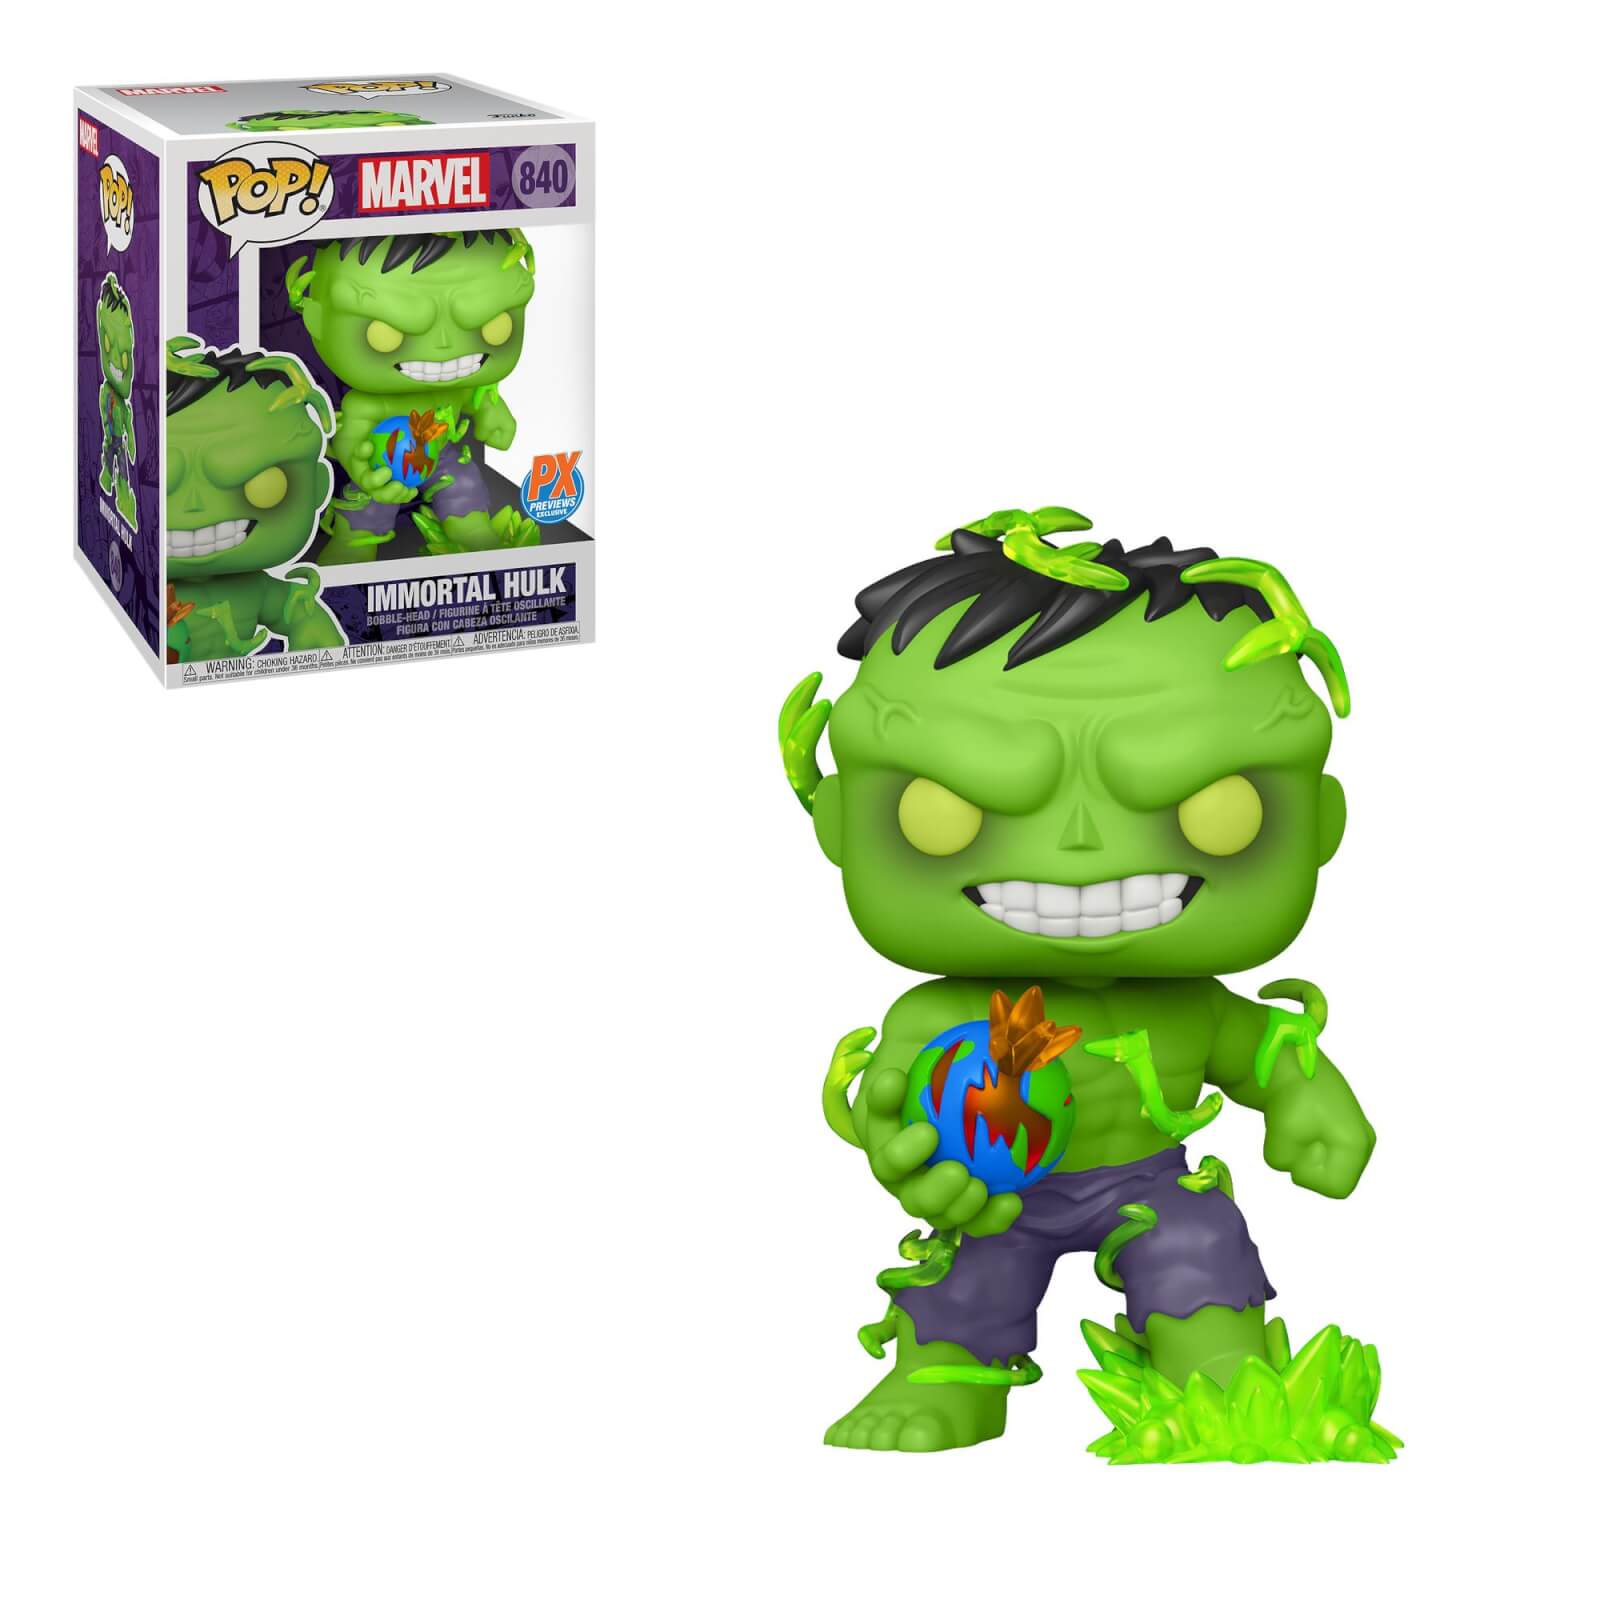 Funko Immortal Hulk PX Exclusive Pop Figure Includes a Chase and Variant Comic!!!